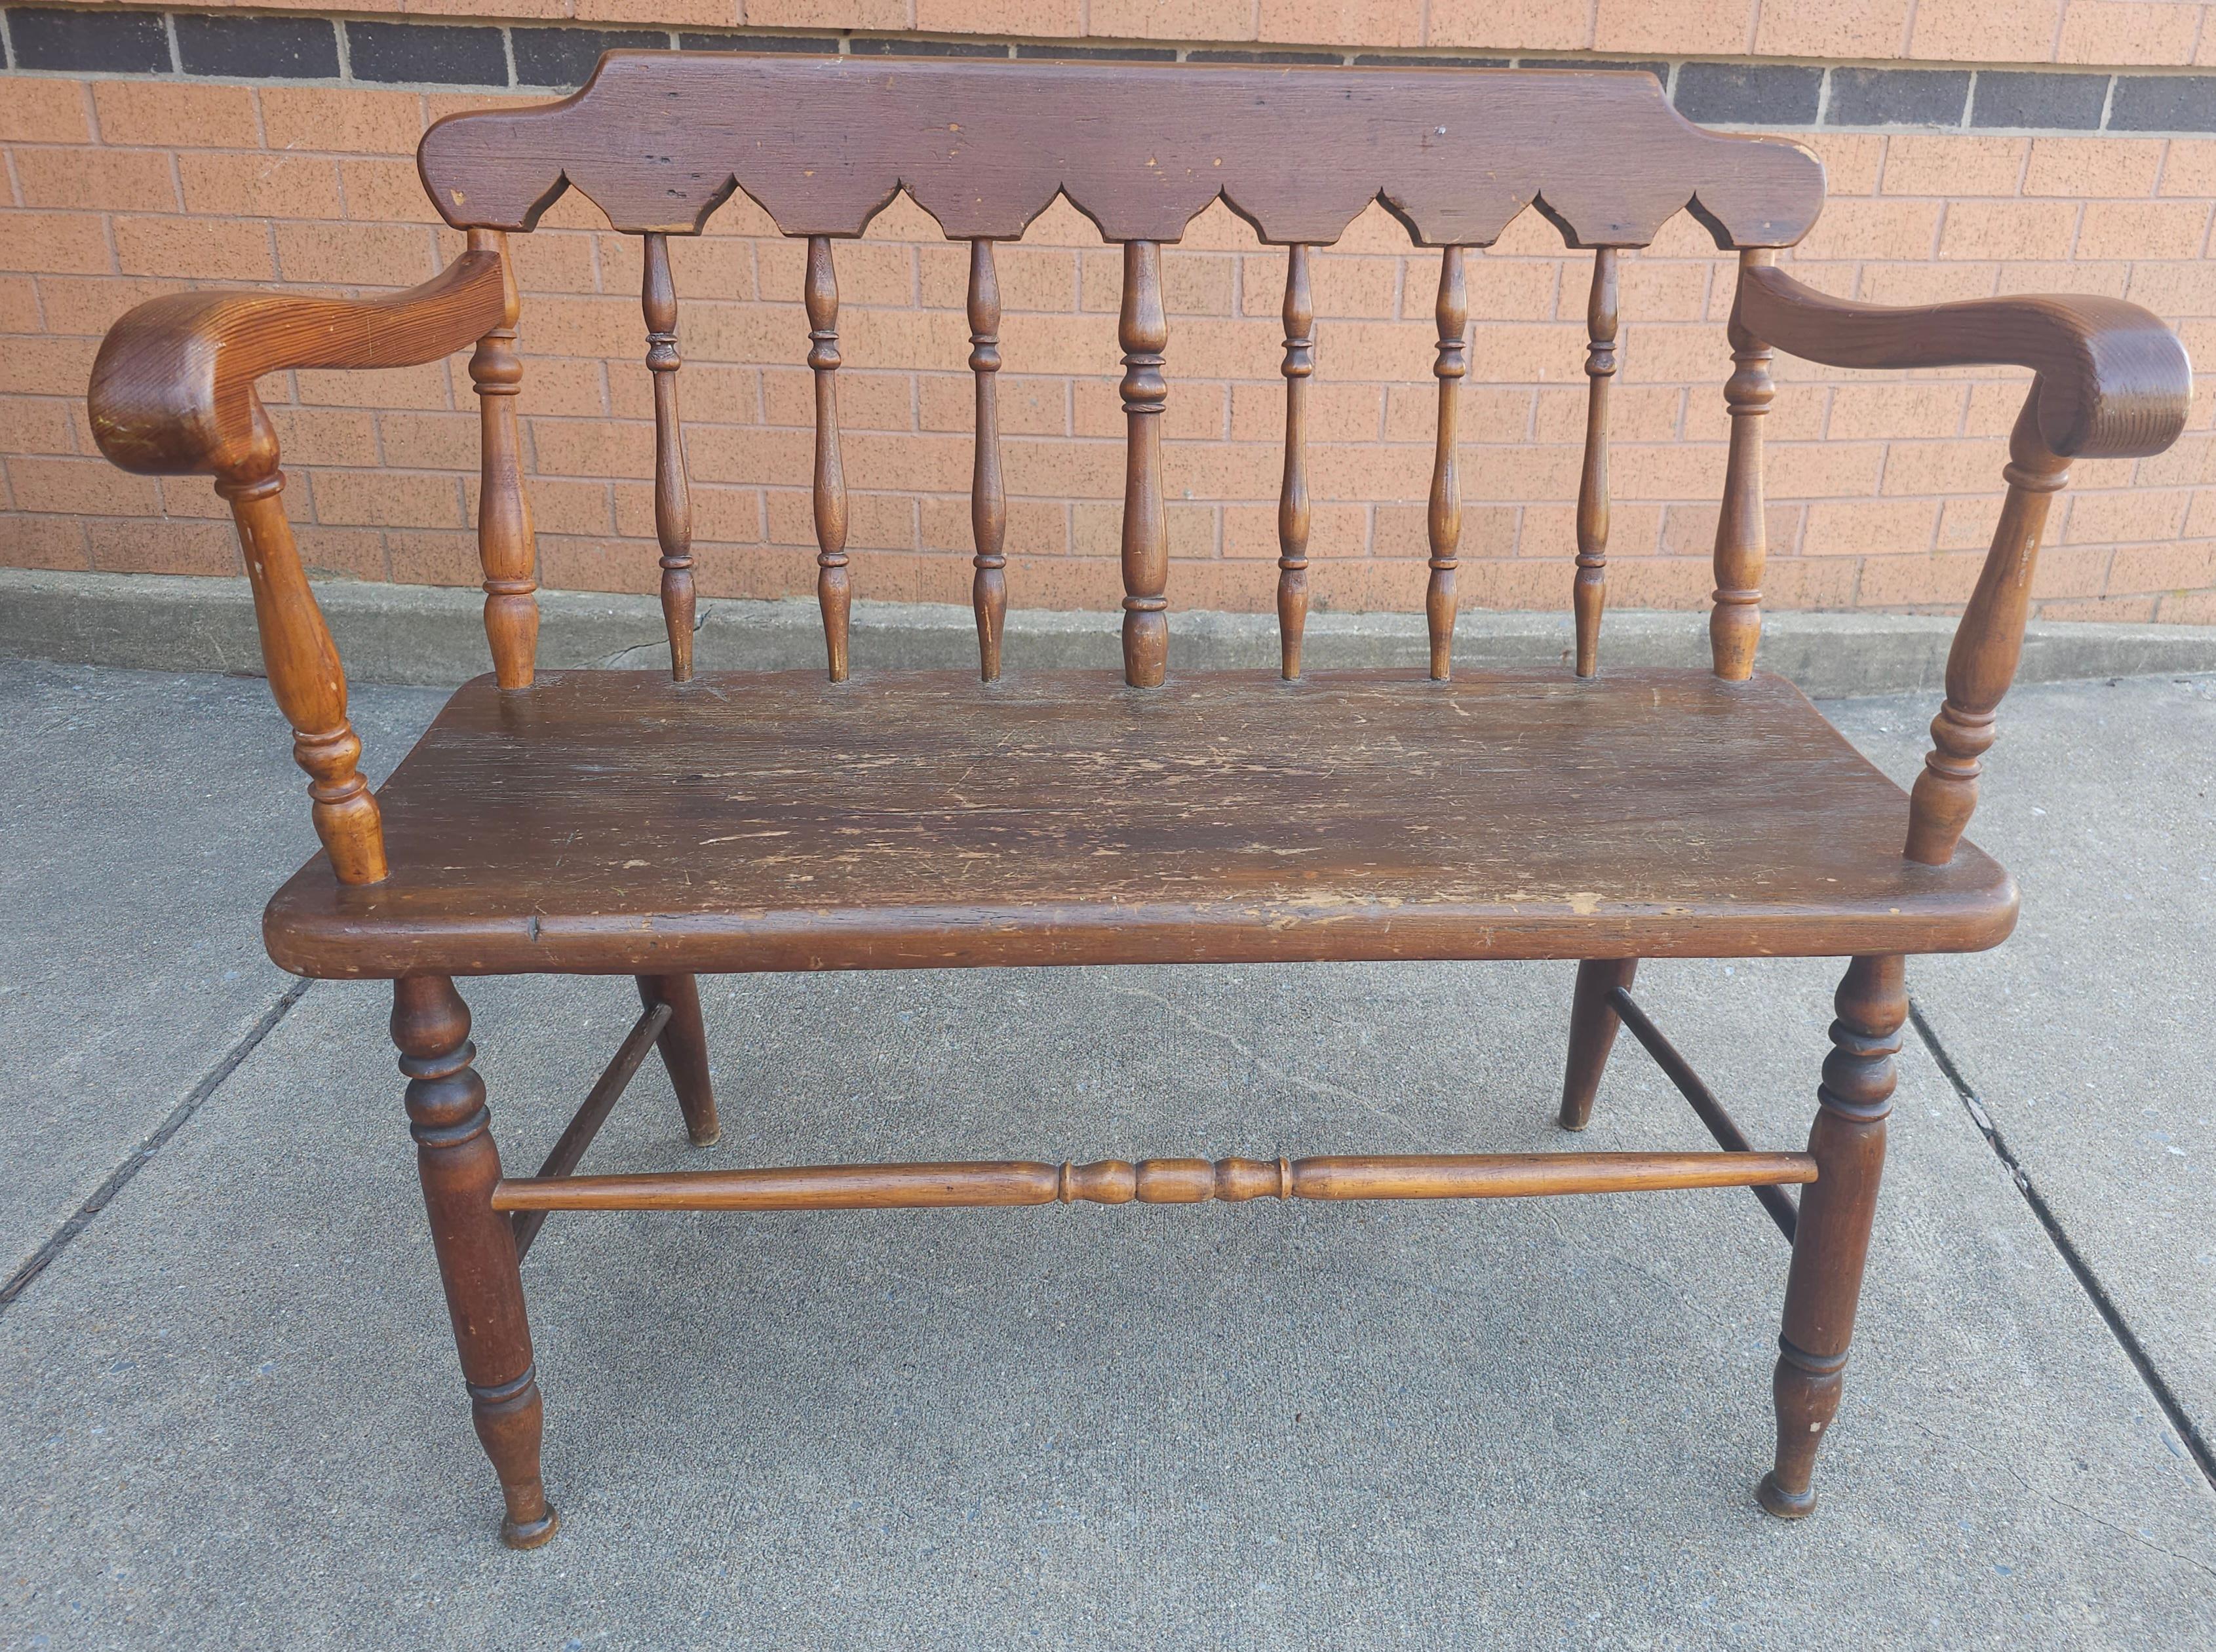 Stained Early American Two Seater Setteee Bench For Sale